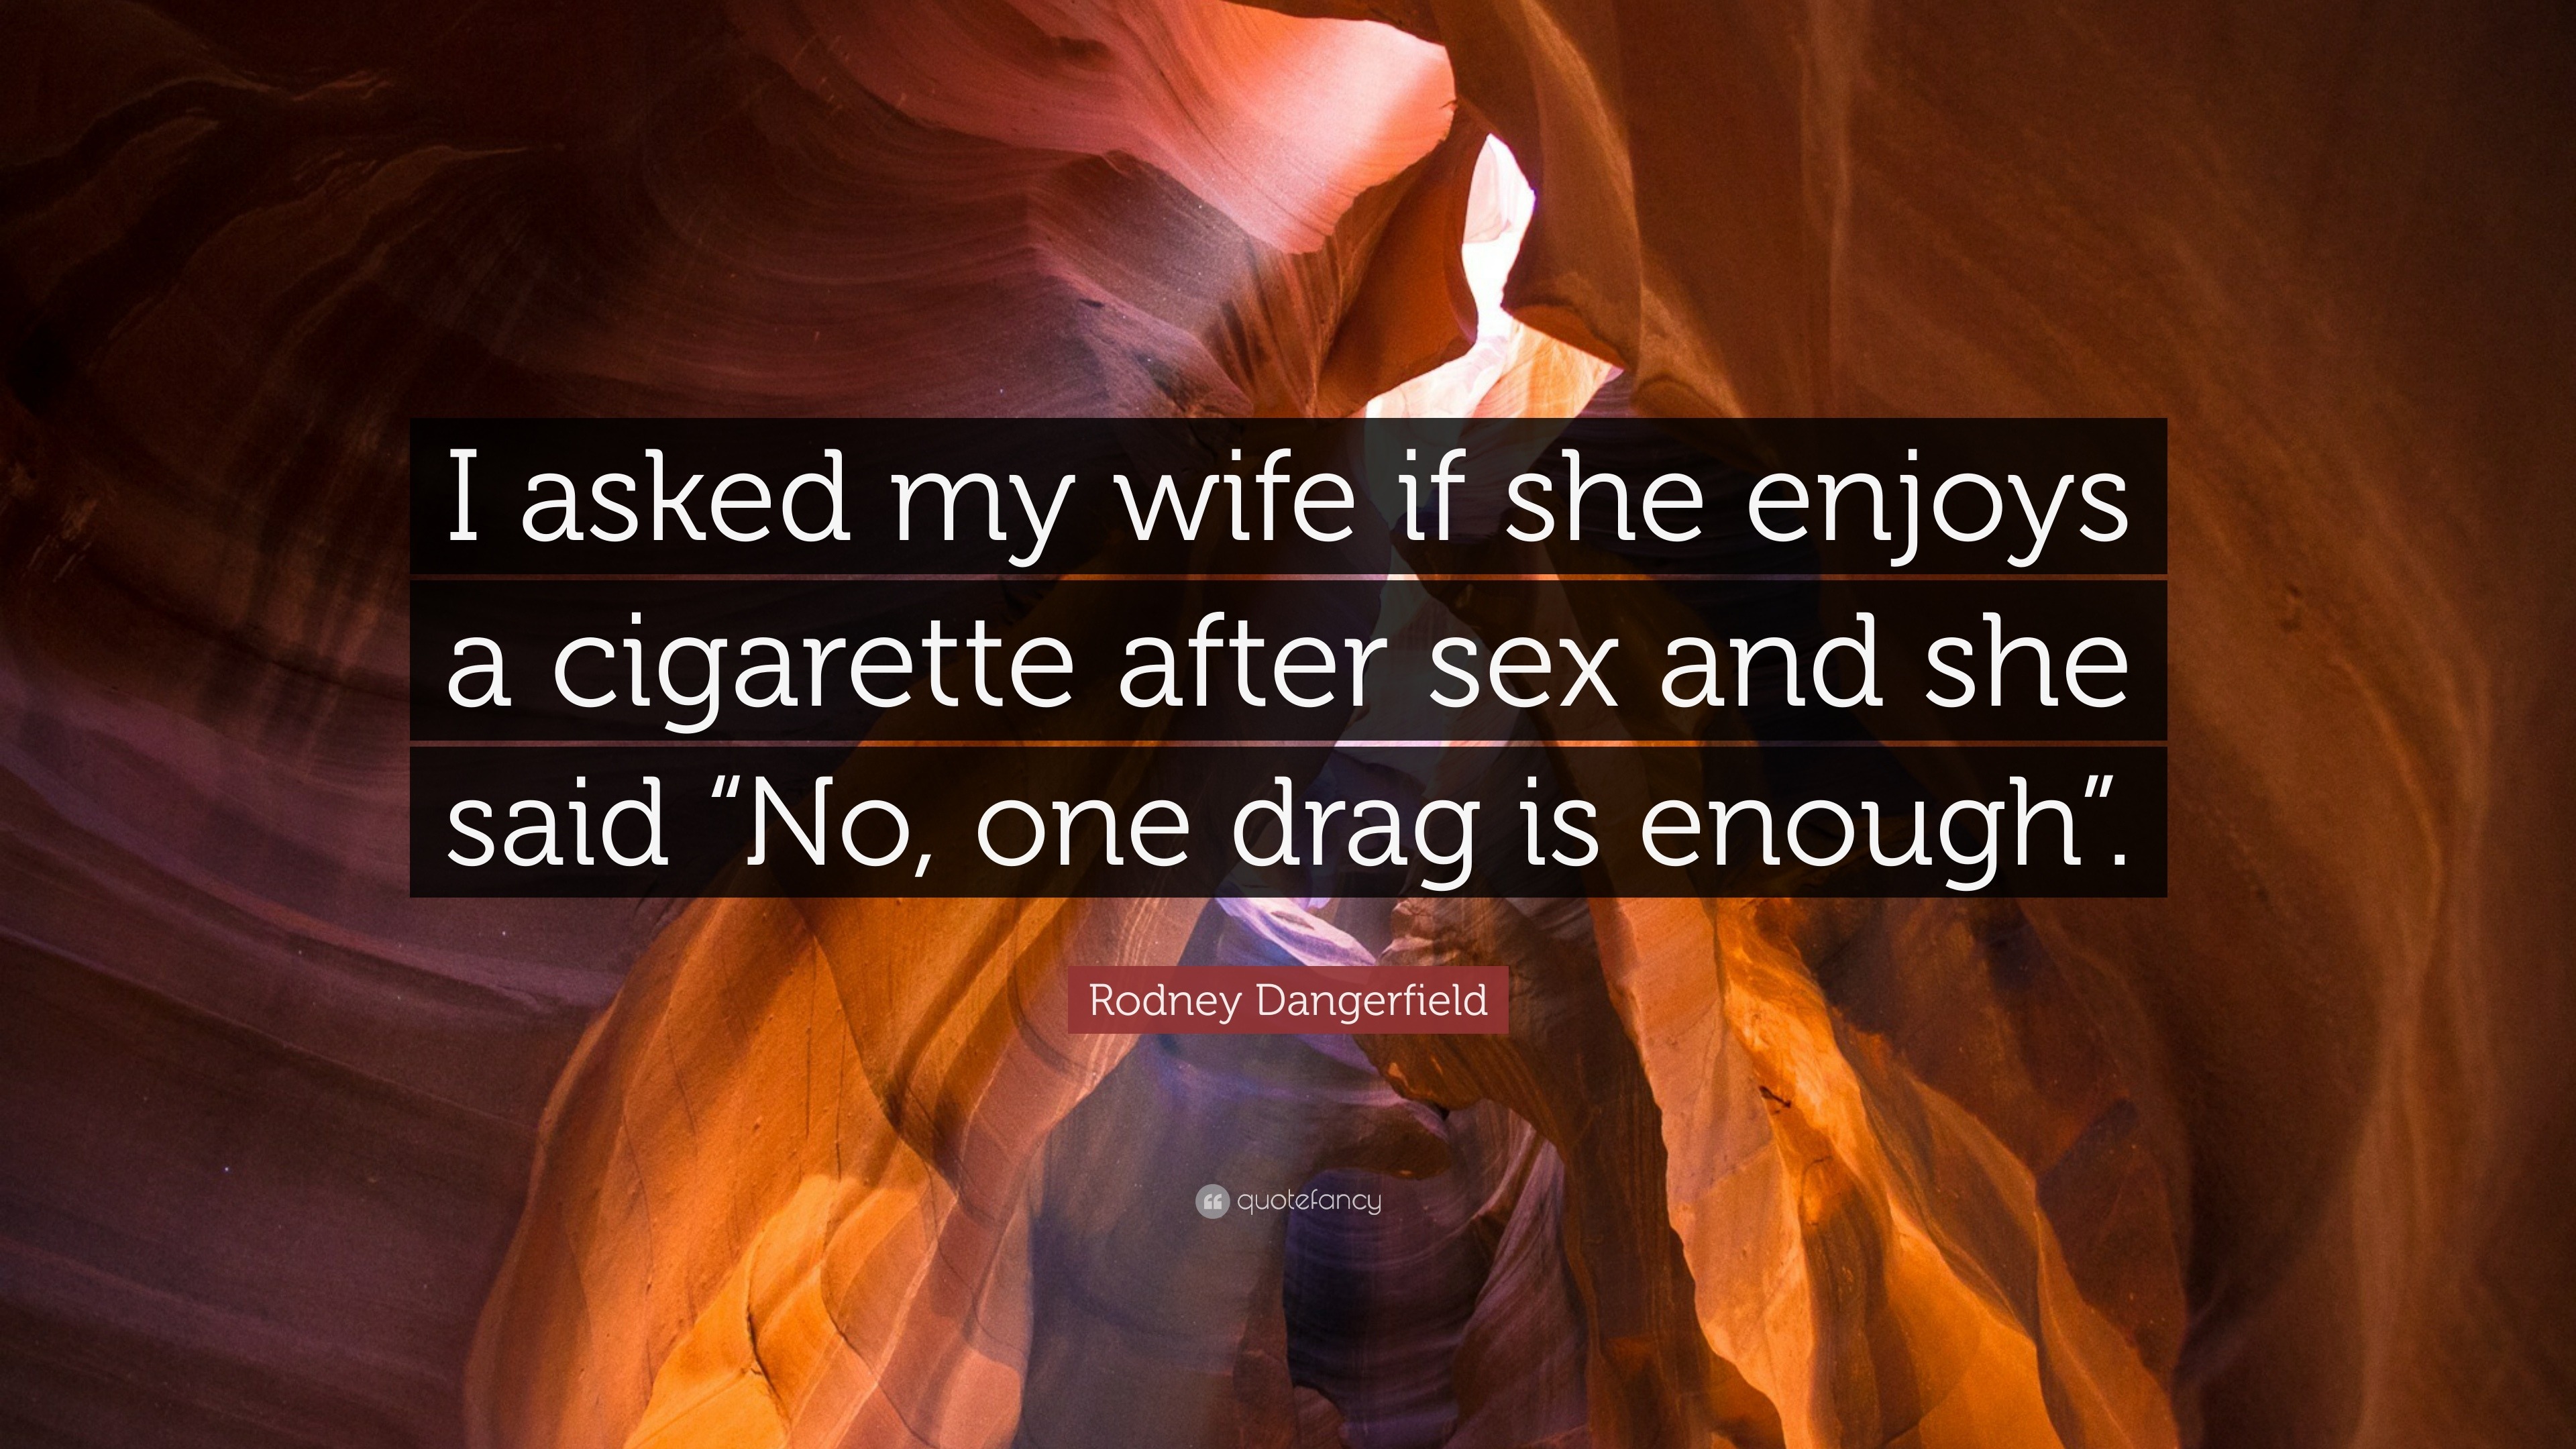 Rodney Dangerfield Quote “I asked my wife if she enjoys a cigarette after sex and picture